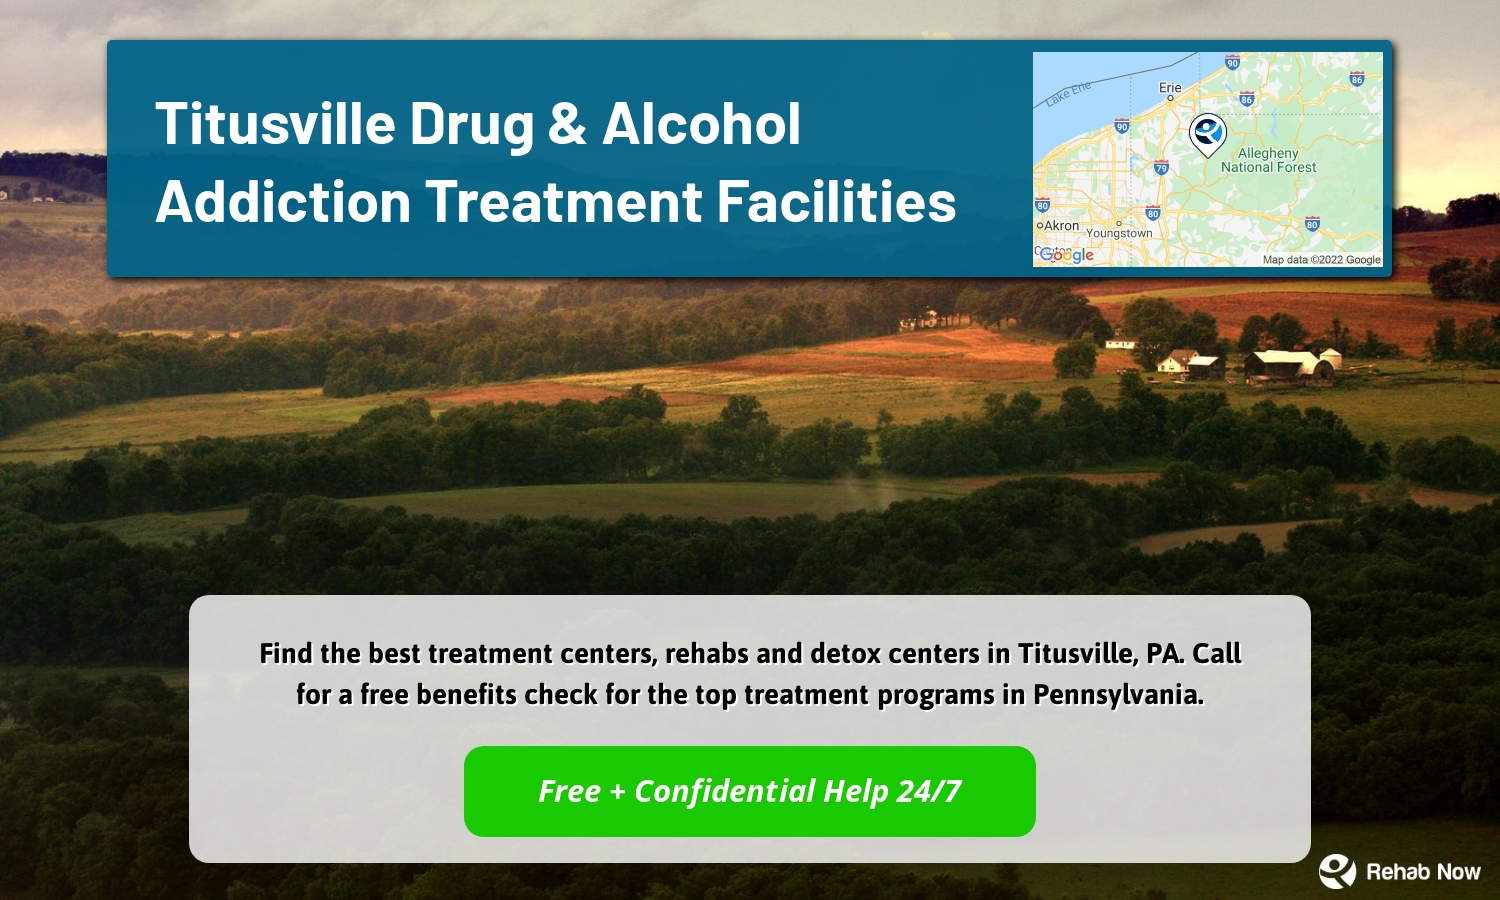 Find the best treatment centers, rehabs and detox centers in Titusville, PA. Call for a free benefits check for the top treatment programs in Pennsylvania.